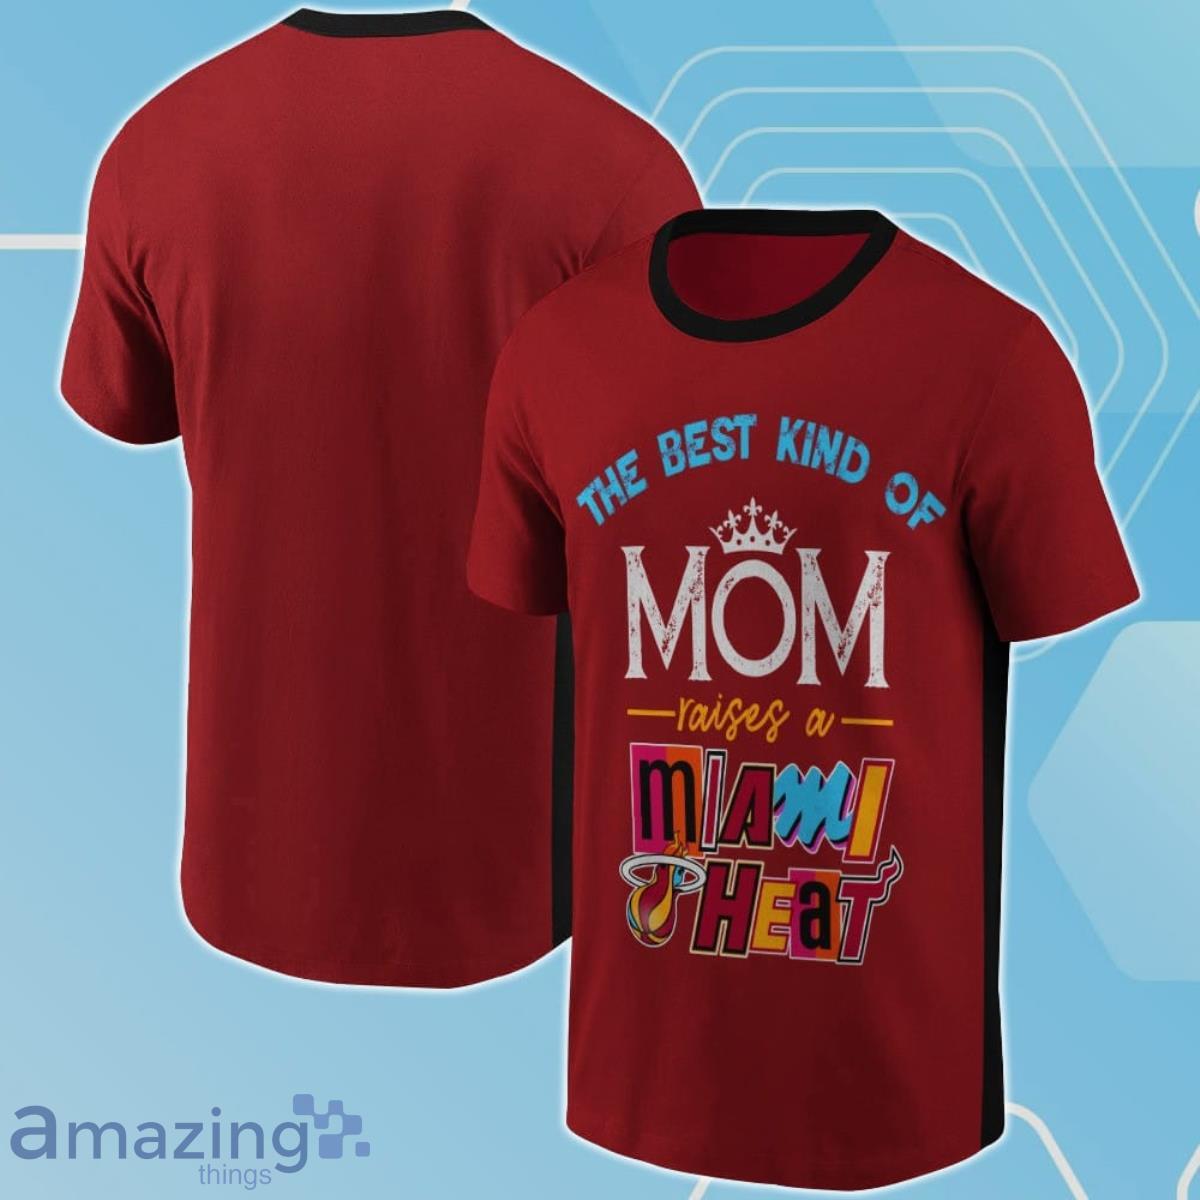 The Best Kind Of Mom Raises A Miami Heat Print 3D Shirt For Real Fans Product Photo 1